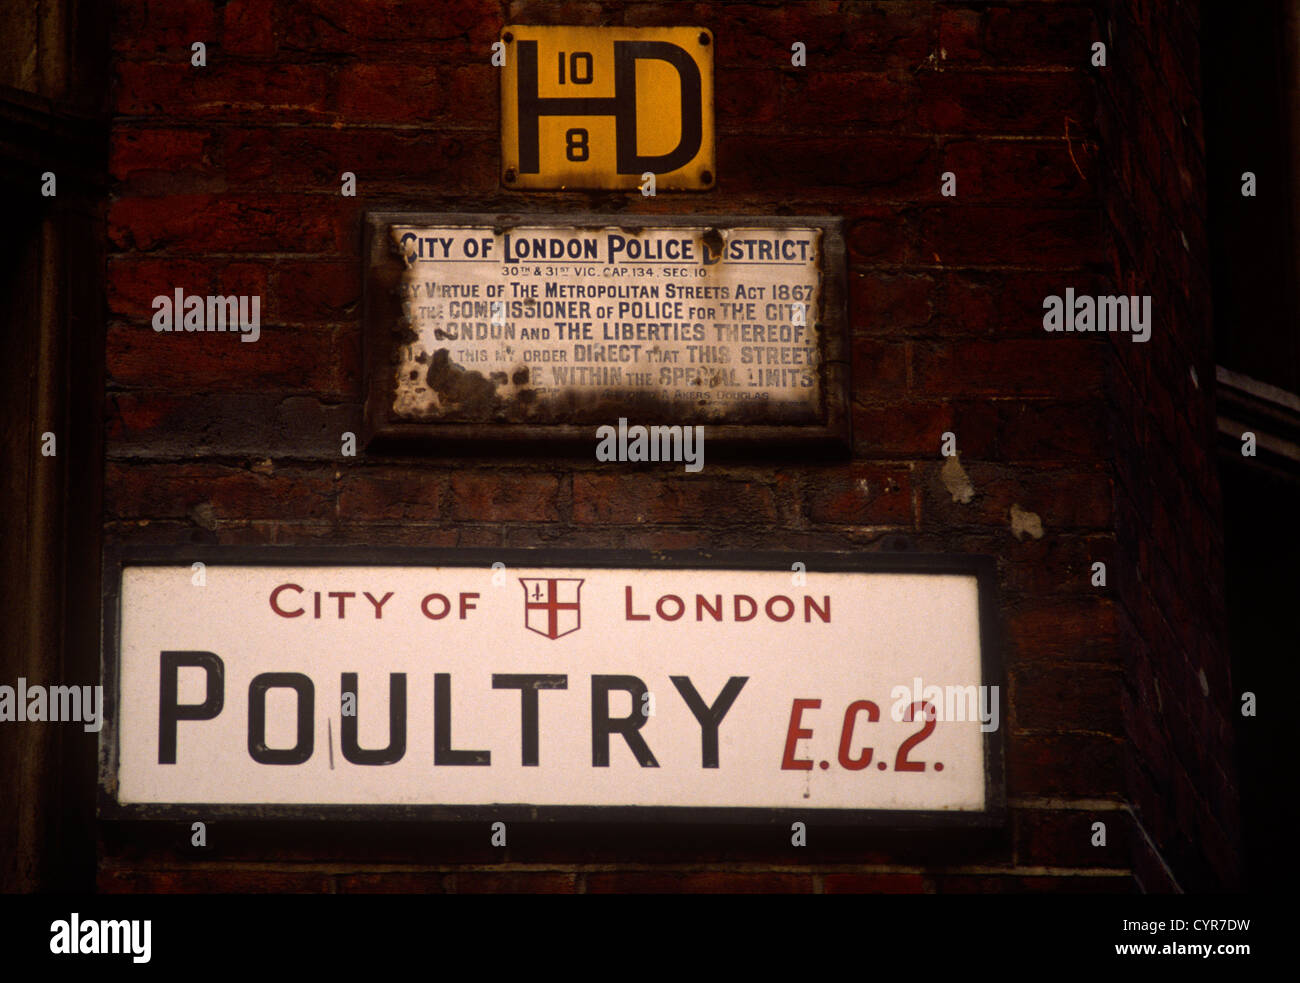 an-old-city-of-london-street-sign-for-poultry-ec2-beneath-a-rusting-CYR7DW.jpg